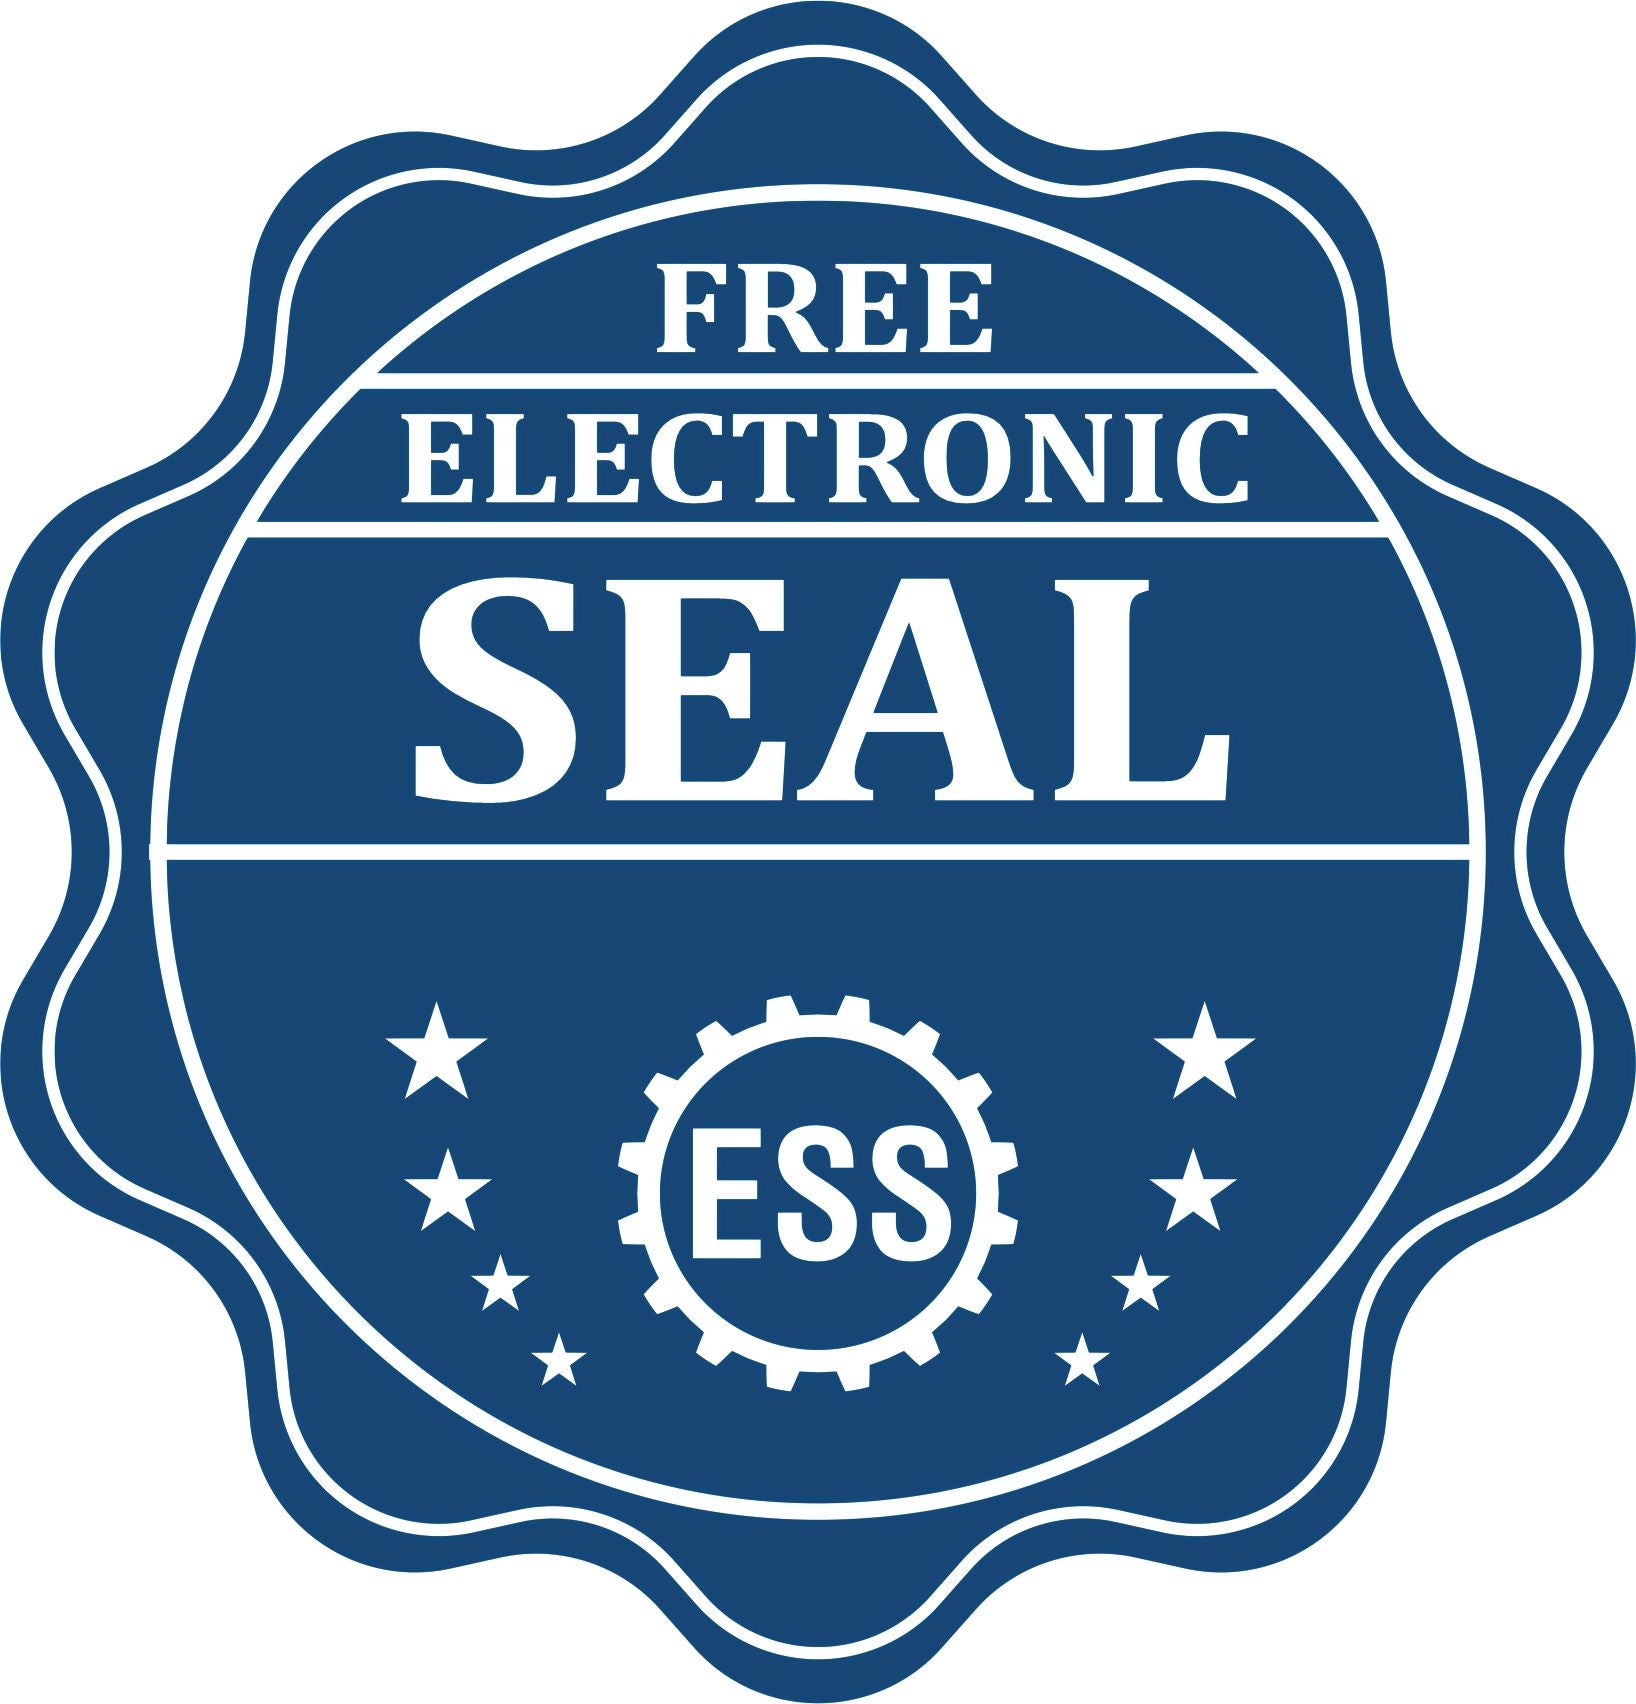 A badge showing a free electronic seal for the Hybrid Kentucky Engineer Seal with stars and the ESS gear on the emblem.